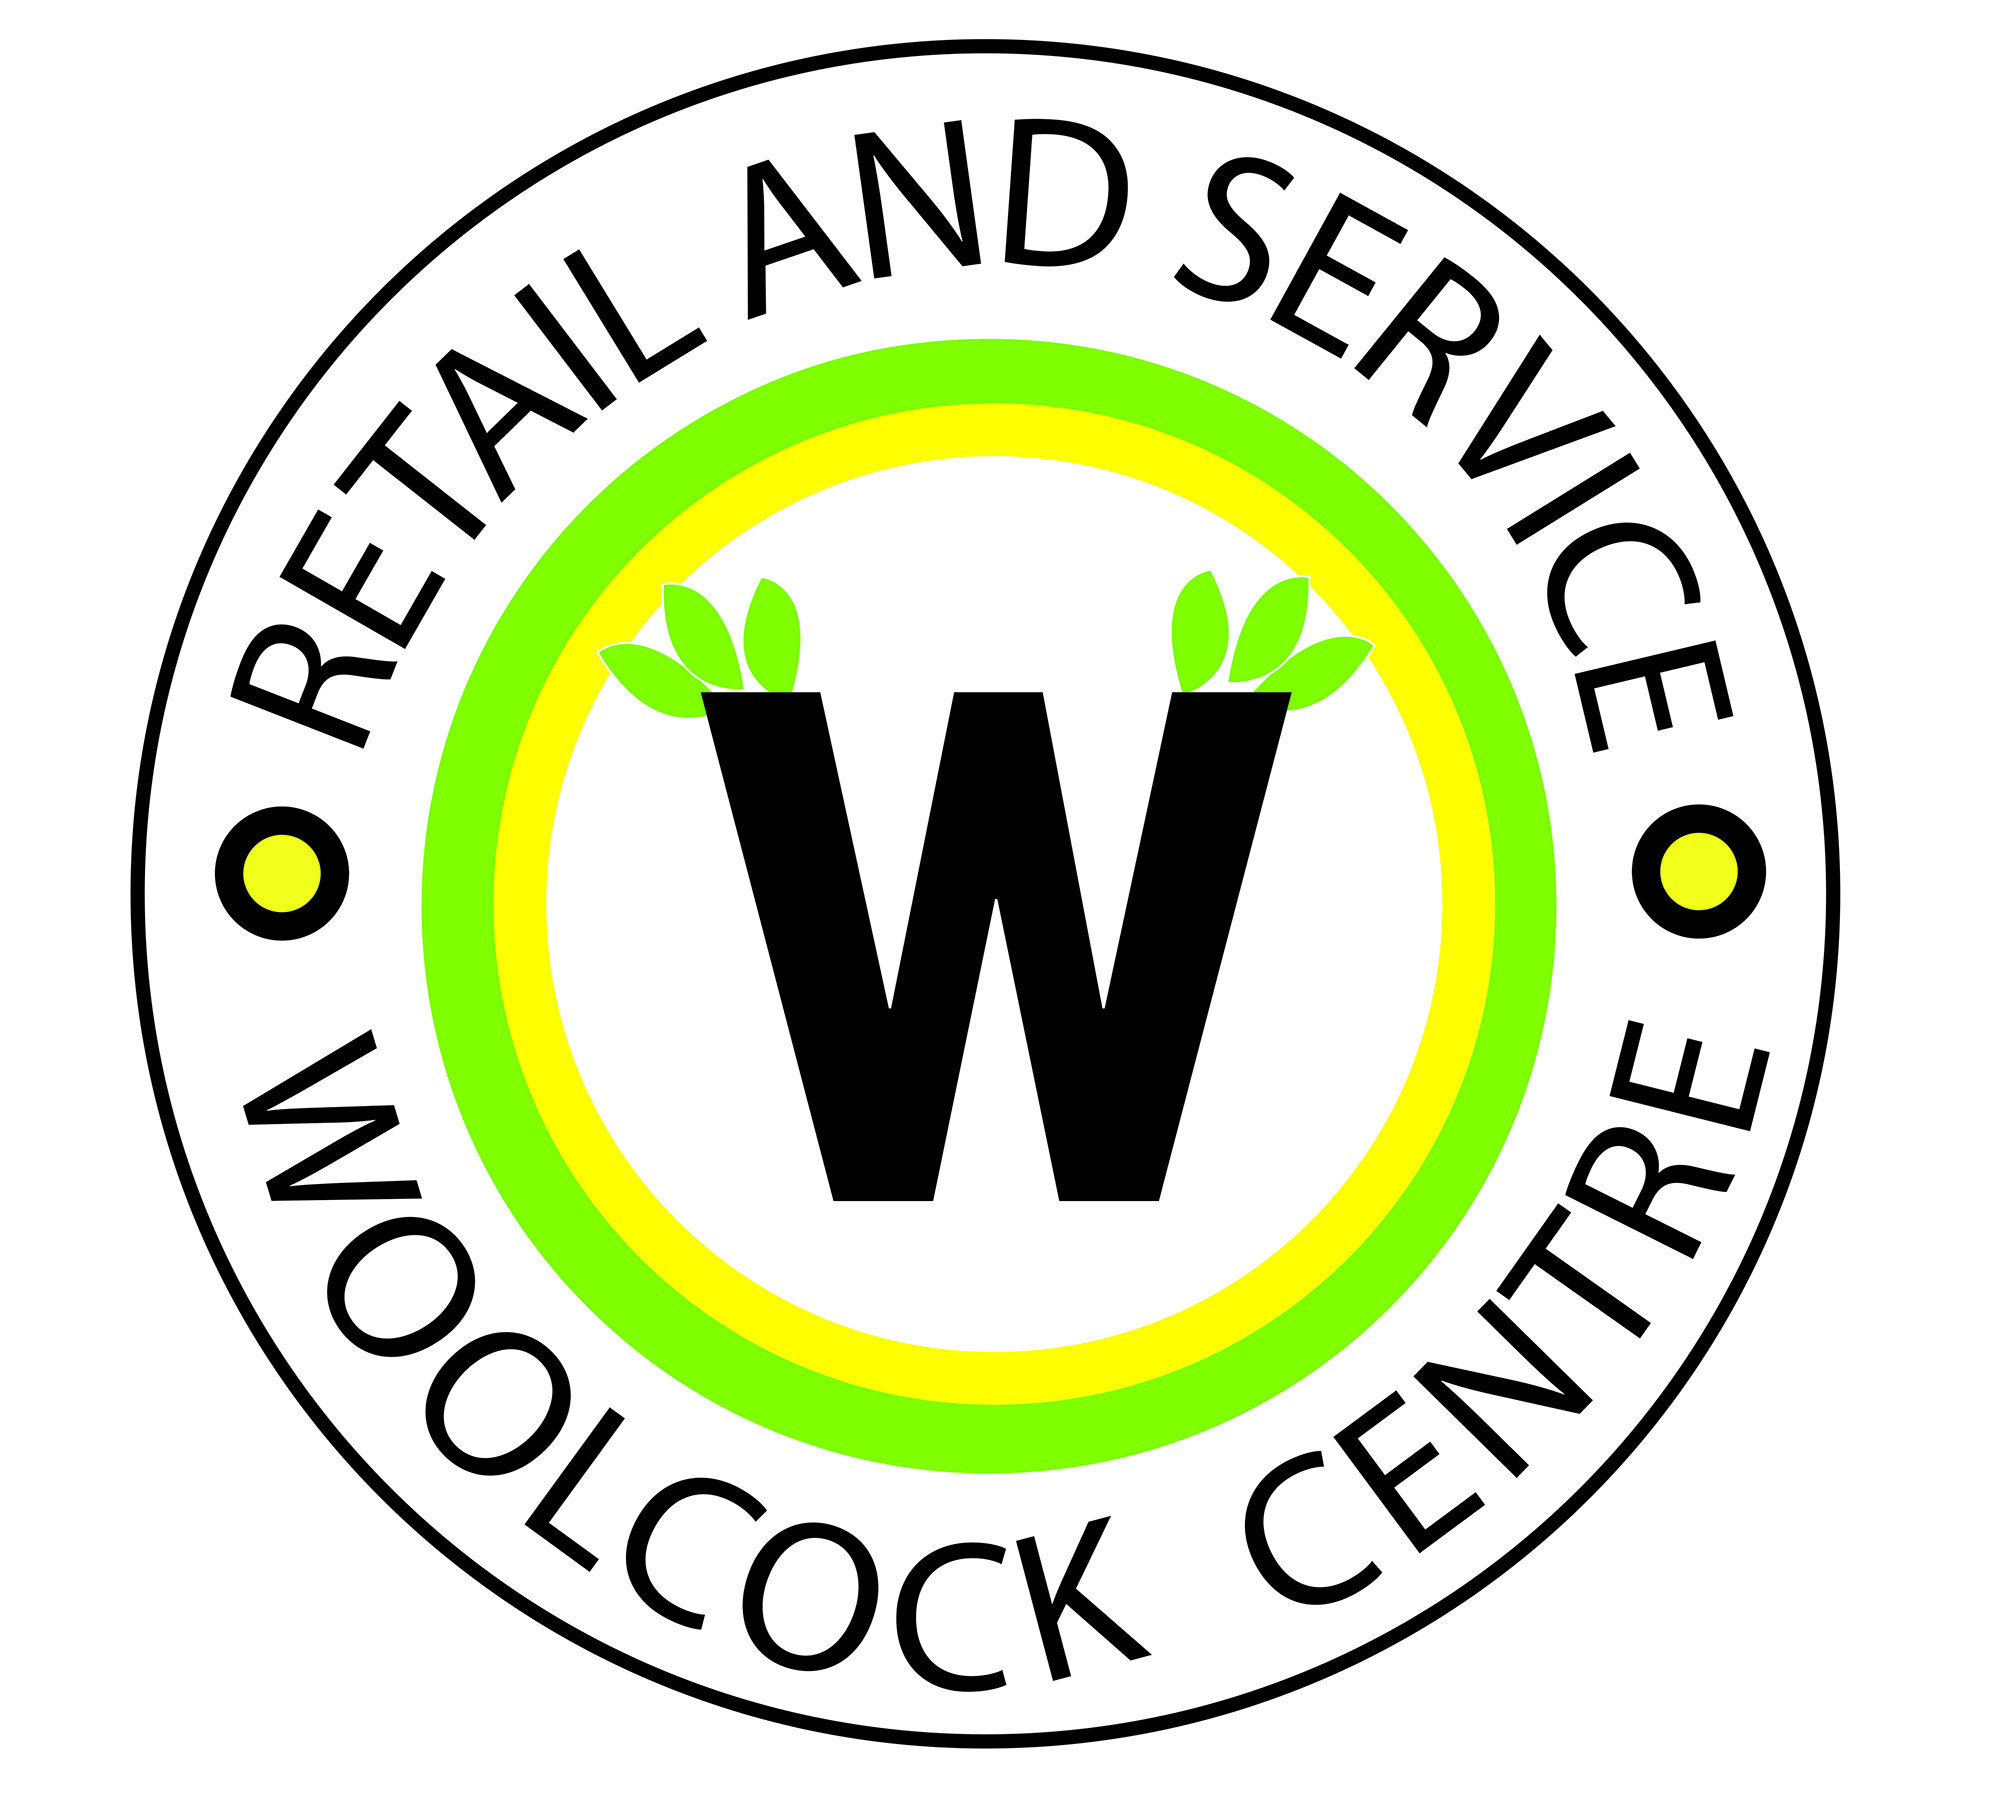 The Woolcock Centre